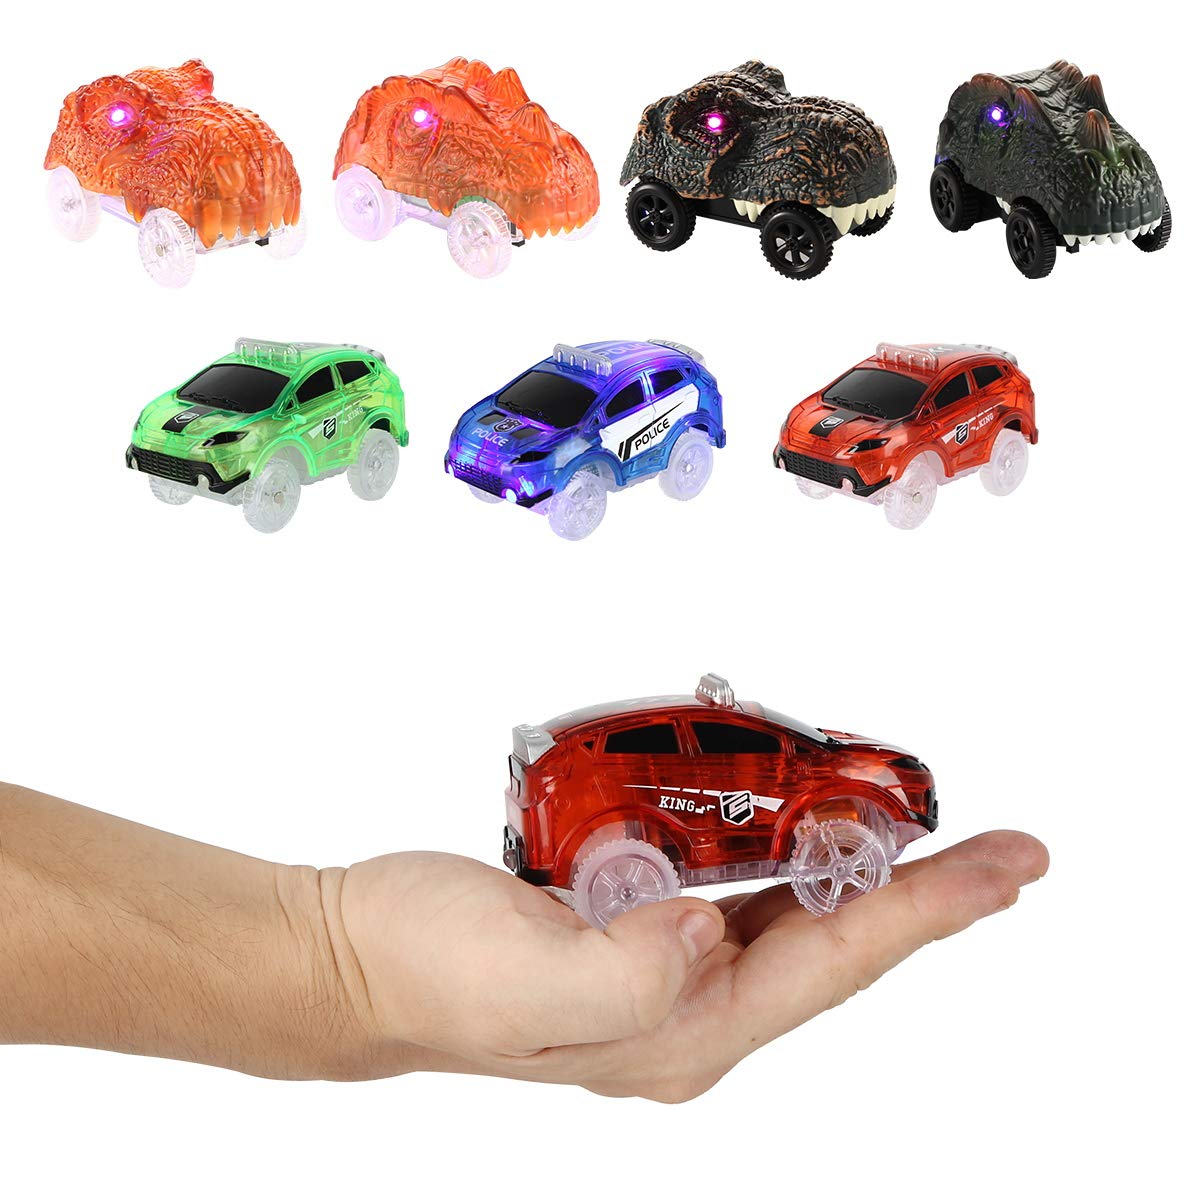 Tracks Cars Replacement only, Toy Cars for Most Tracks Glow in The Dark, Racing Car Track Accessories with 5 Flashing LED Lights, Compatible with Most Tracks for Kids Boys and Girls(3pack)